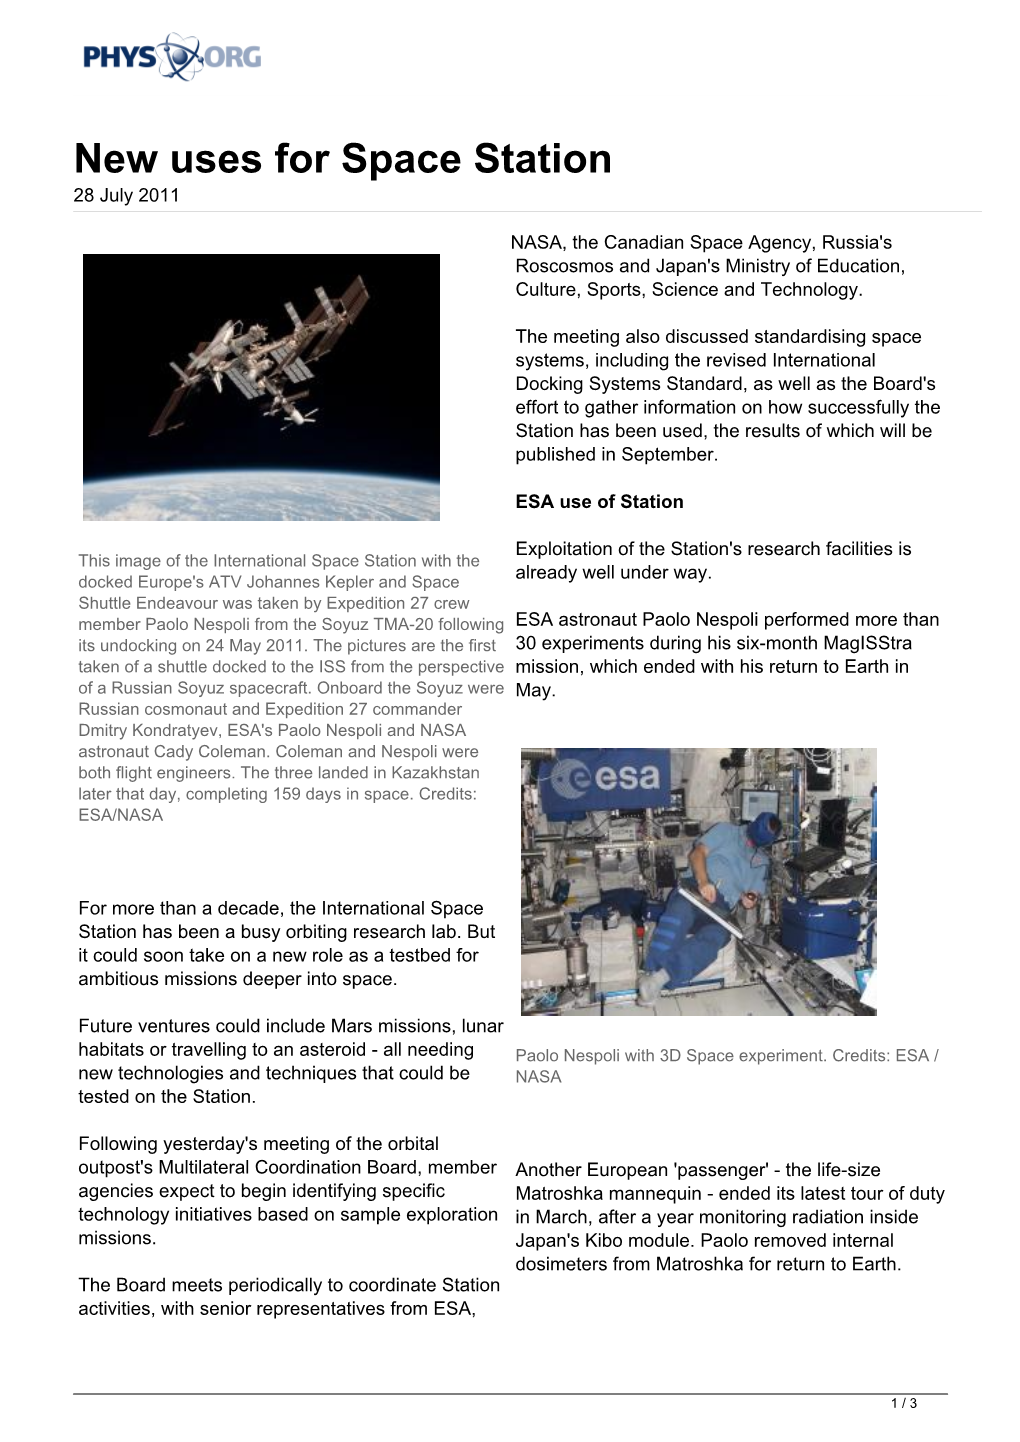 New Uses for Space Station 28 July 2011